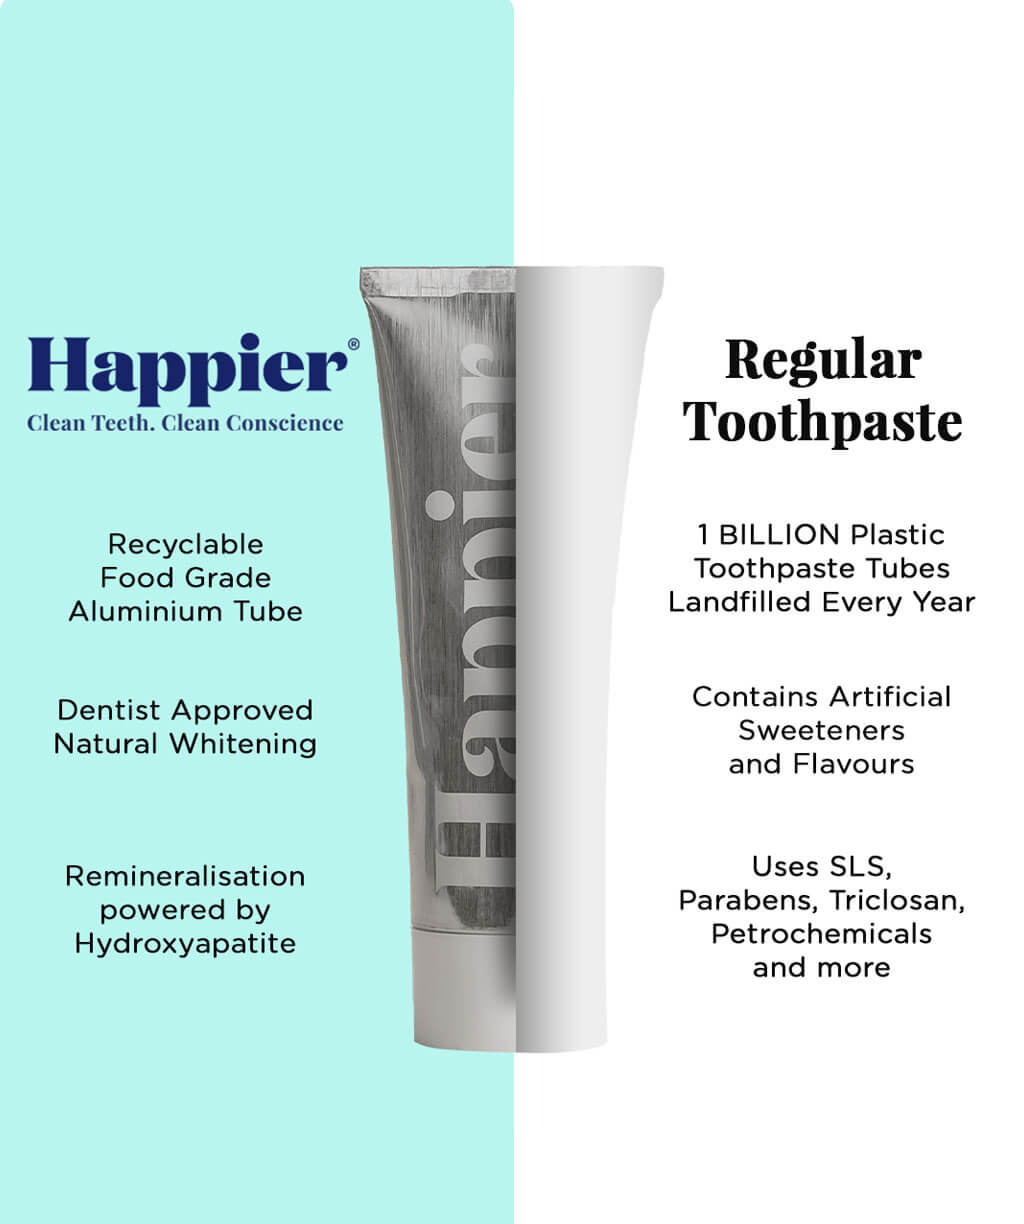 Happier toothpaste vs regular toothpaste: a comparison of two toothpaste tubes side by side.